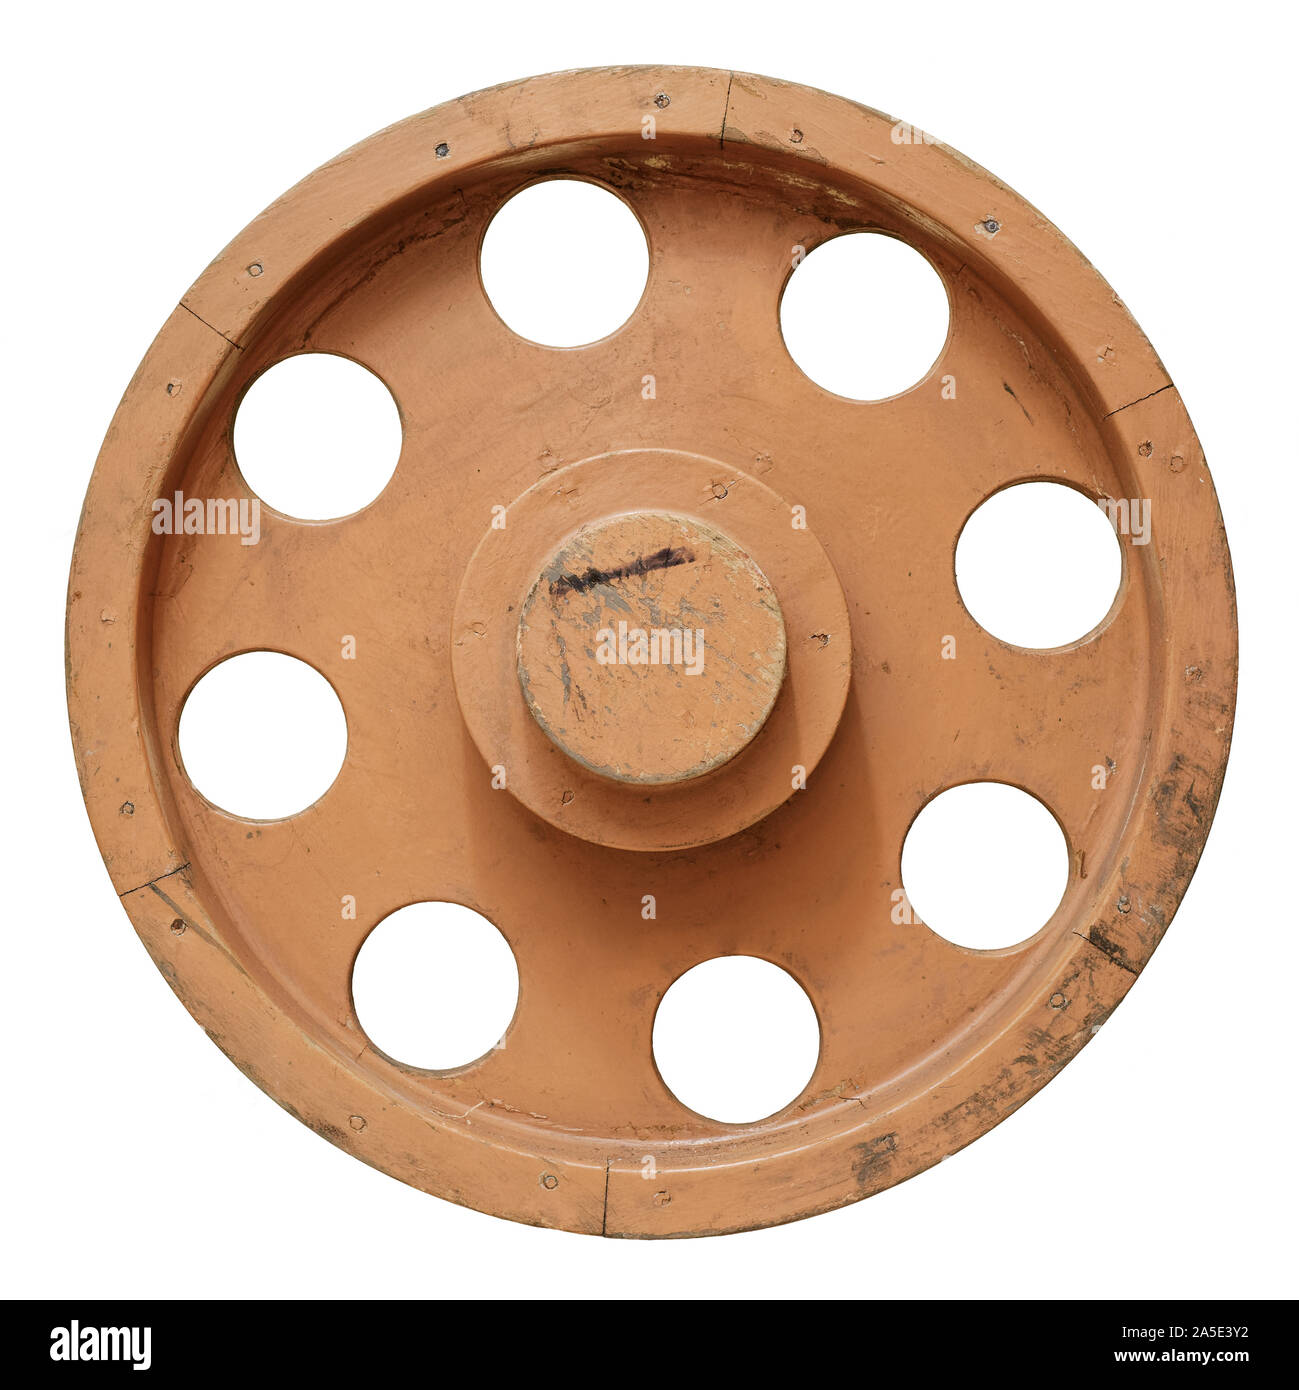 Isolated objects: old brown wooden wheel, on white background Stock Photo